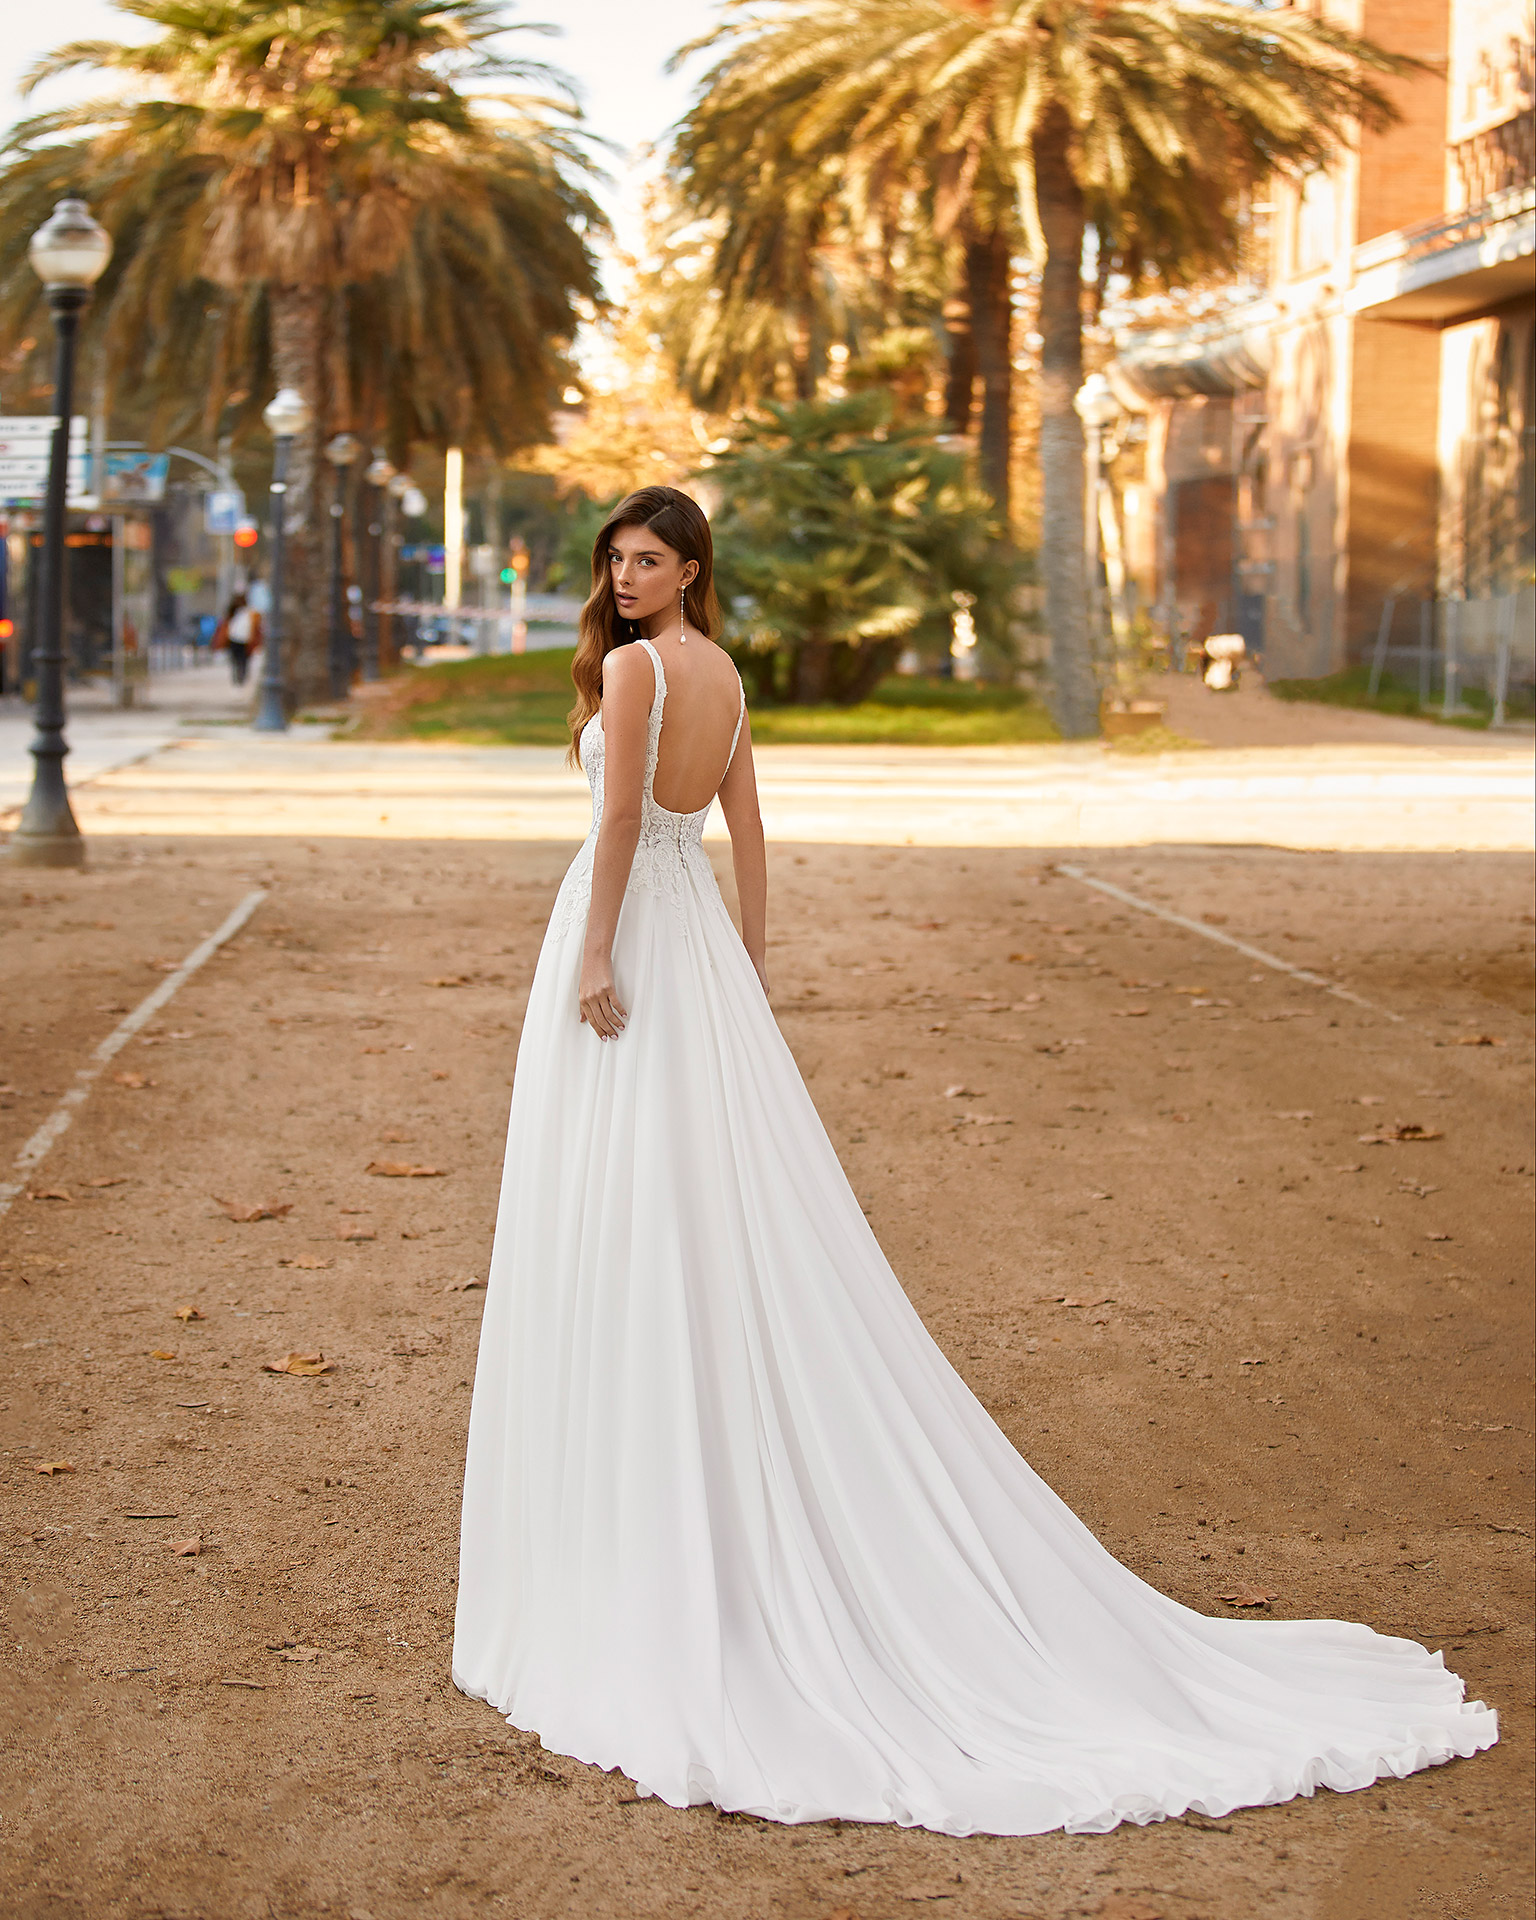 Flowing ballgown-style wedding dress made of Georgette, with a sheath-style skirt with a front slit; with a square neckline and a plunging lace back. Delicate Luna Novias design made of Georgette combined with beadwork lace. LUNA_NOVIAS.